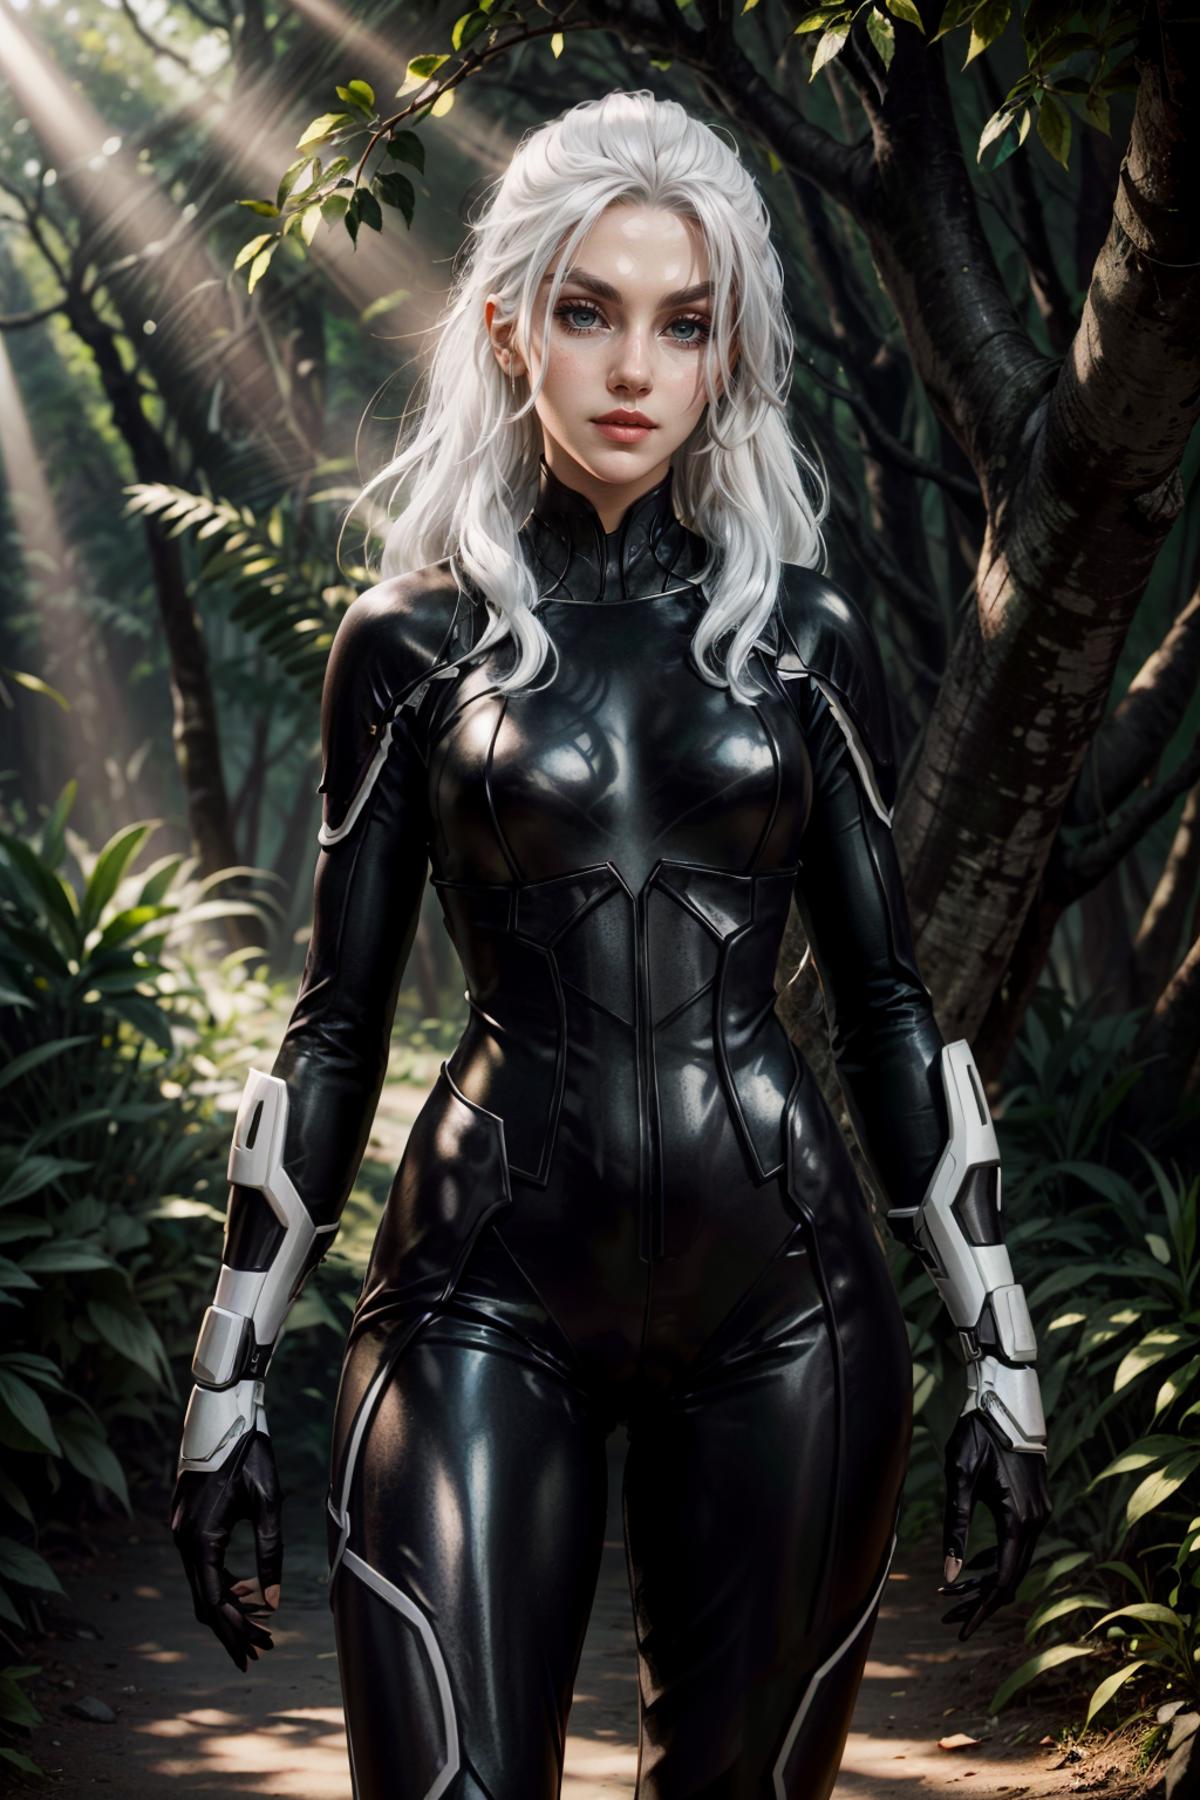 Felicia Hardy (Black Cat) from Spider Man image by BloodRedKittie